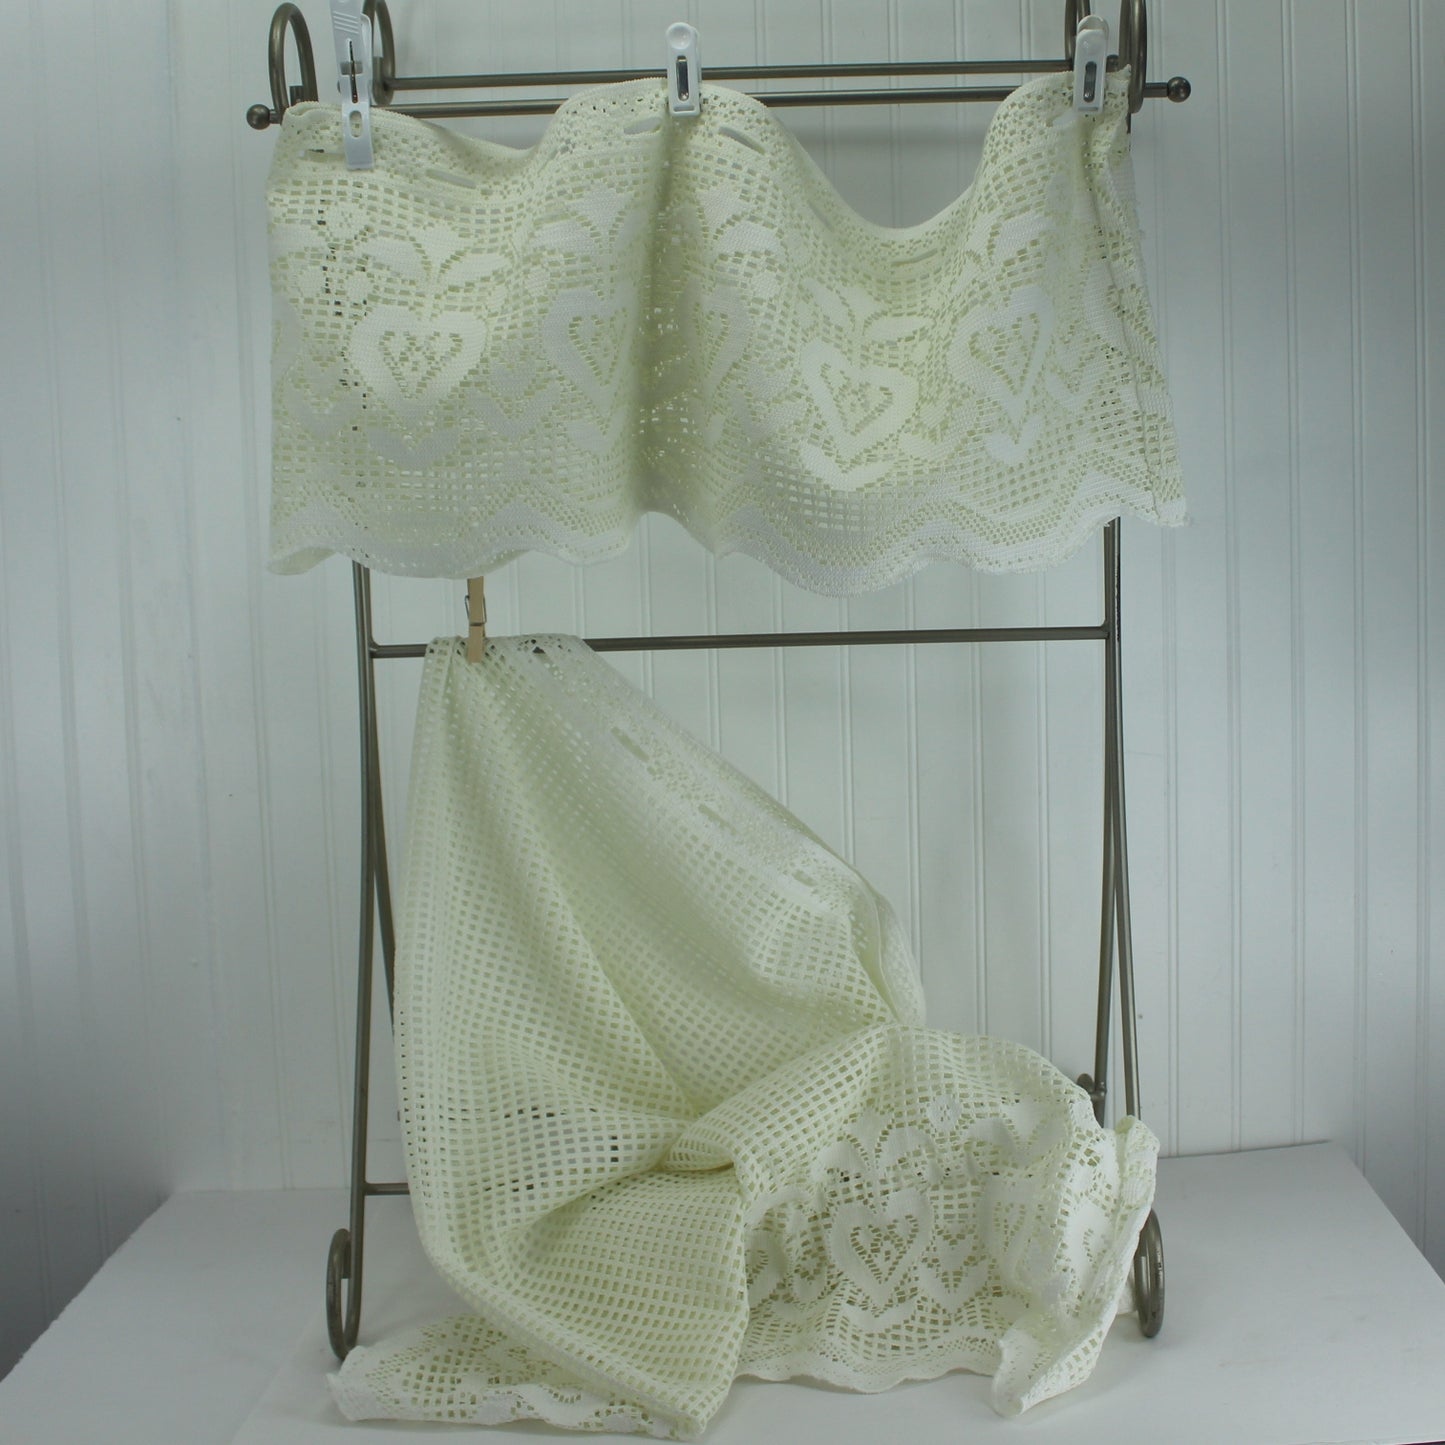 Ivory Window Curtain Valance & Panel Heavy Woven Lace Hearts Tulip Pattern excellent condition